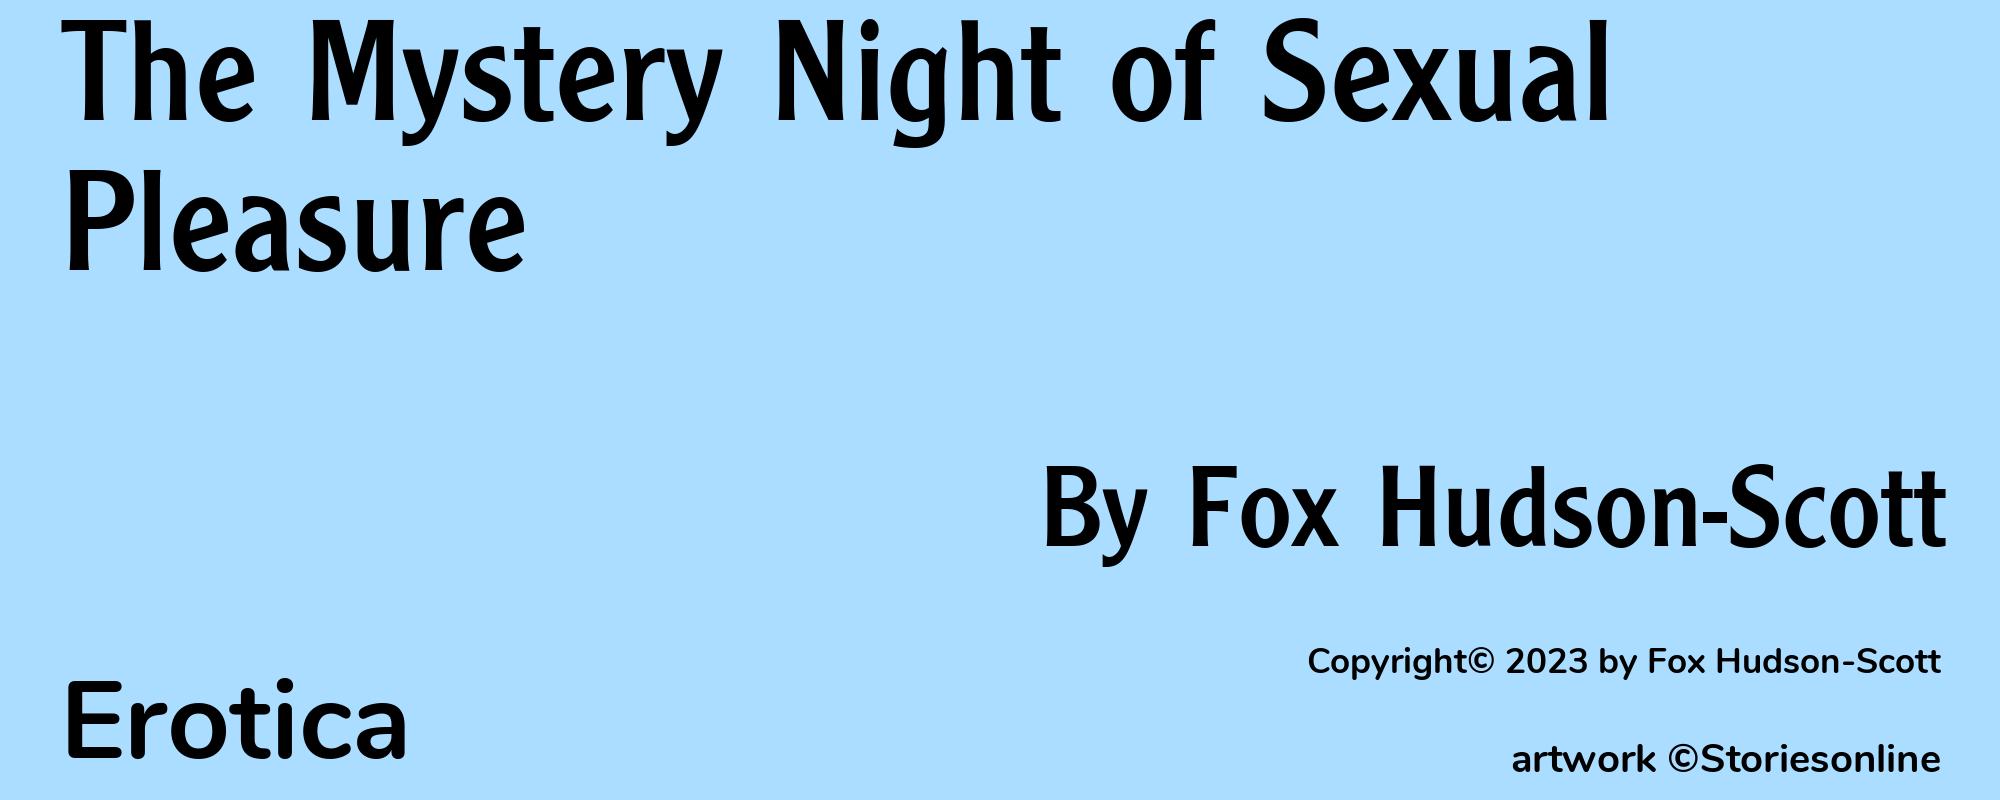 The Mystery Night of Sexual Pleasure - Cover